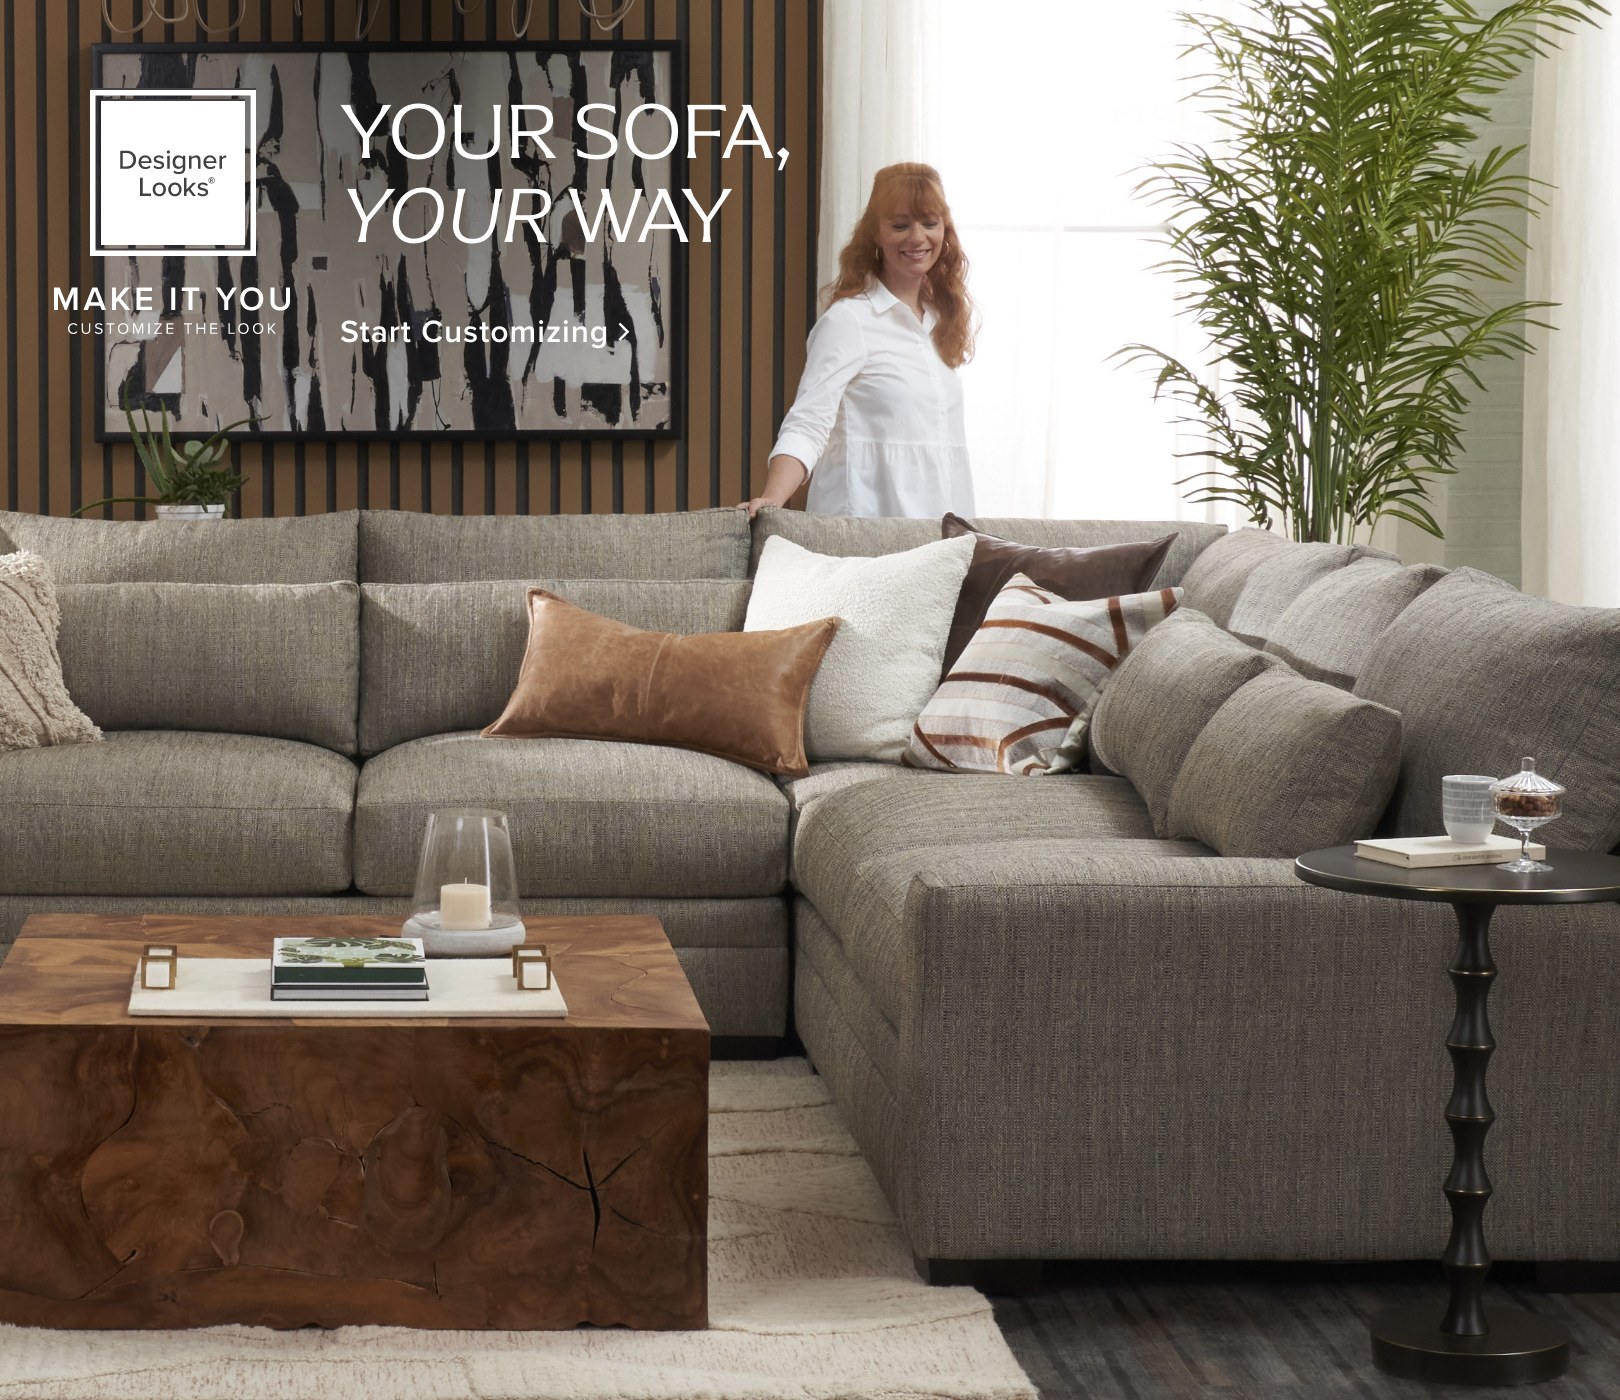 Your sofa your way